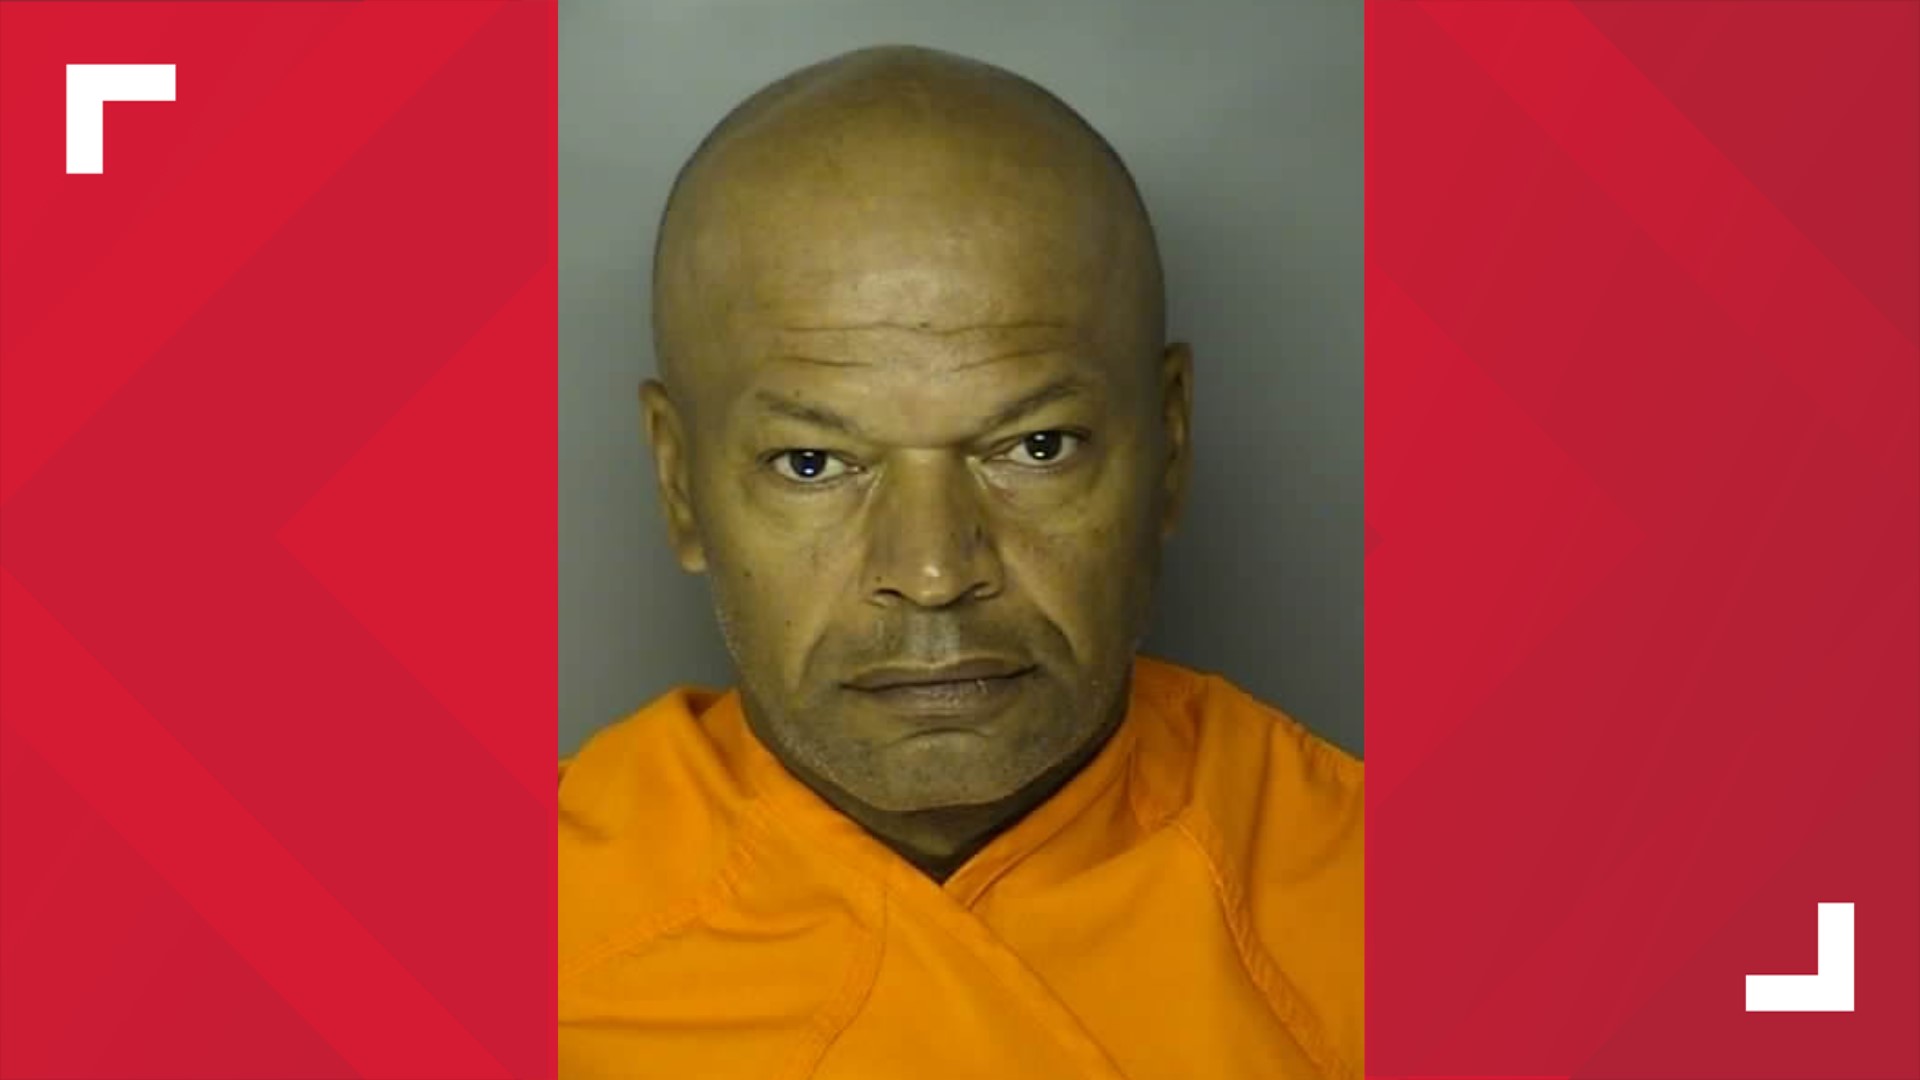 Montgomery County Police said the man labeled as Potomac River Rapist has been arrested.